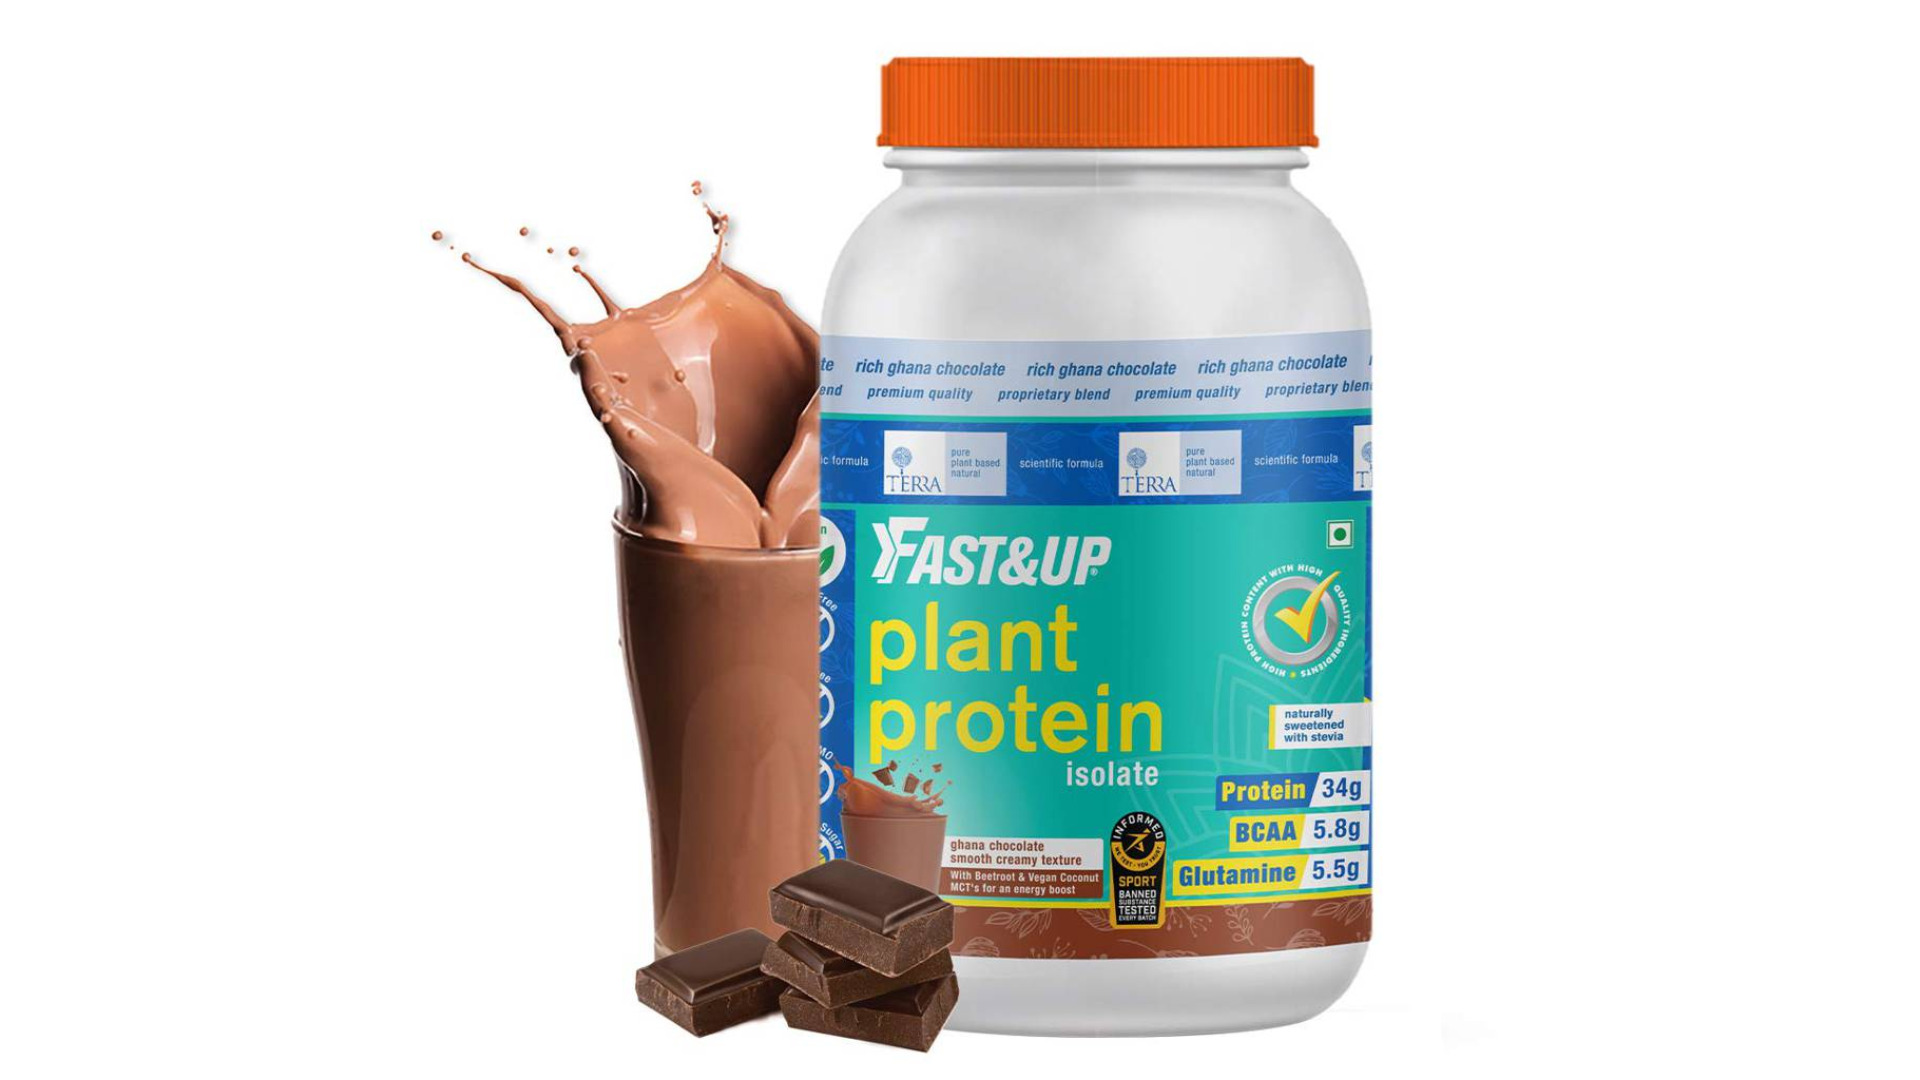 Fast & Up Plant Protein